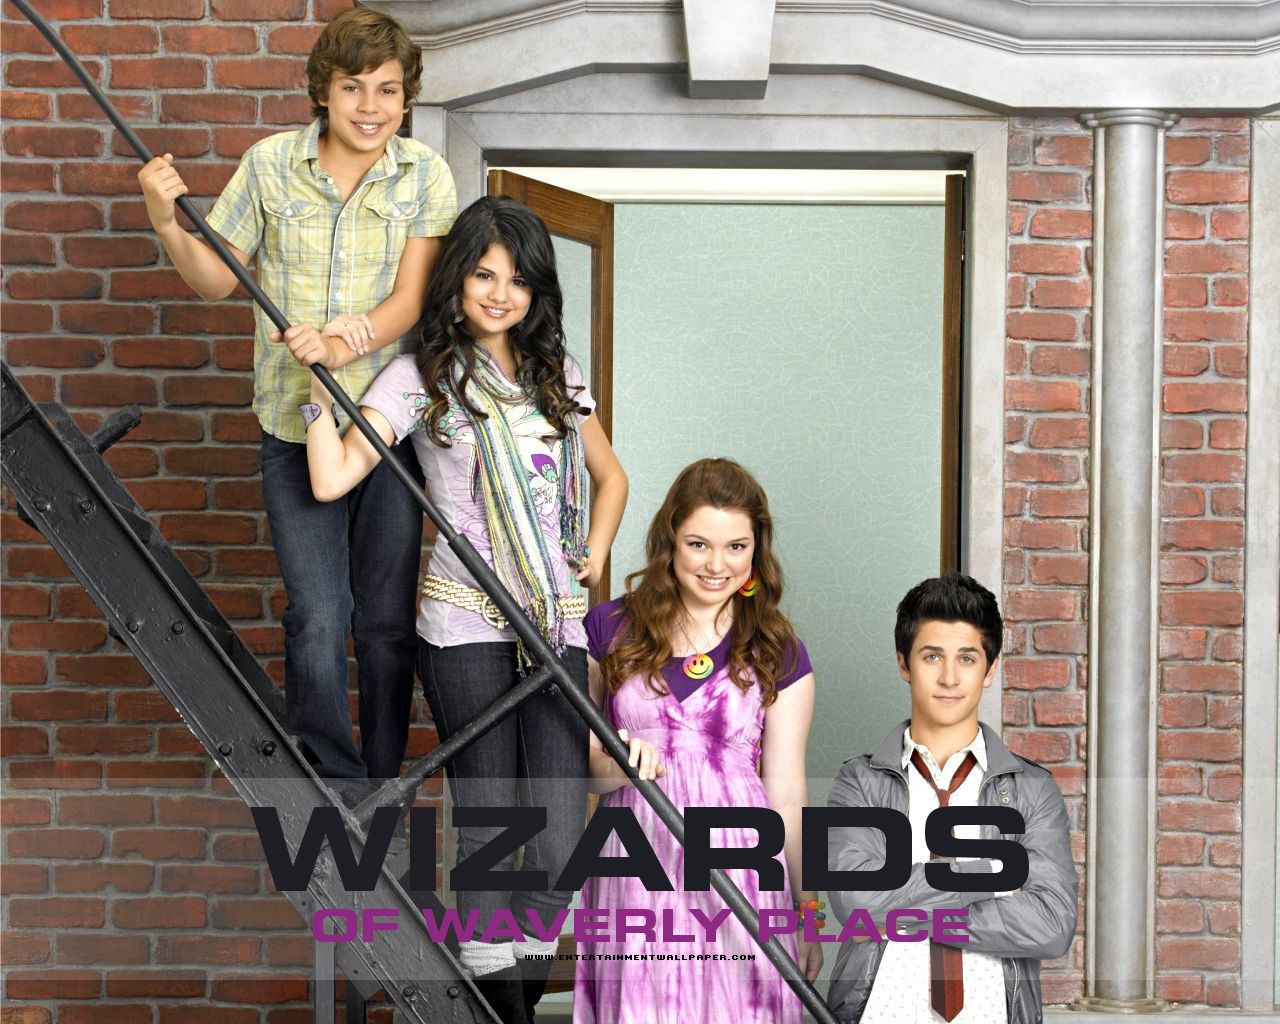 Wizards of Waverly Place 少年魔法師 #7 - 1280x1024